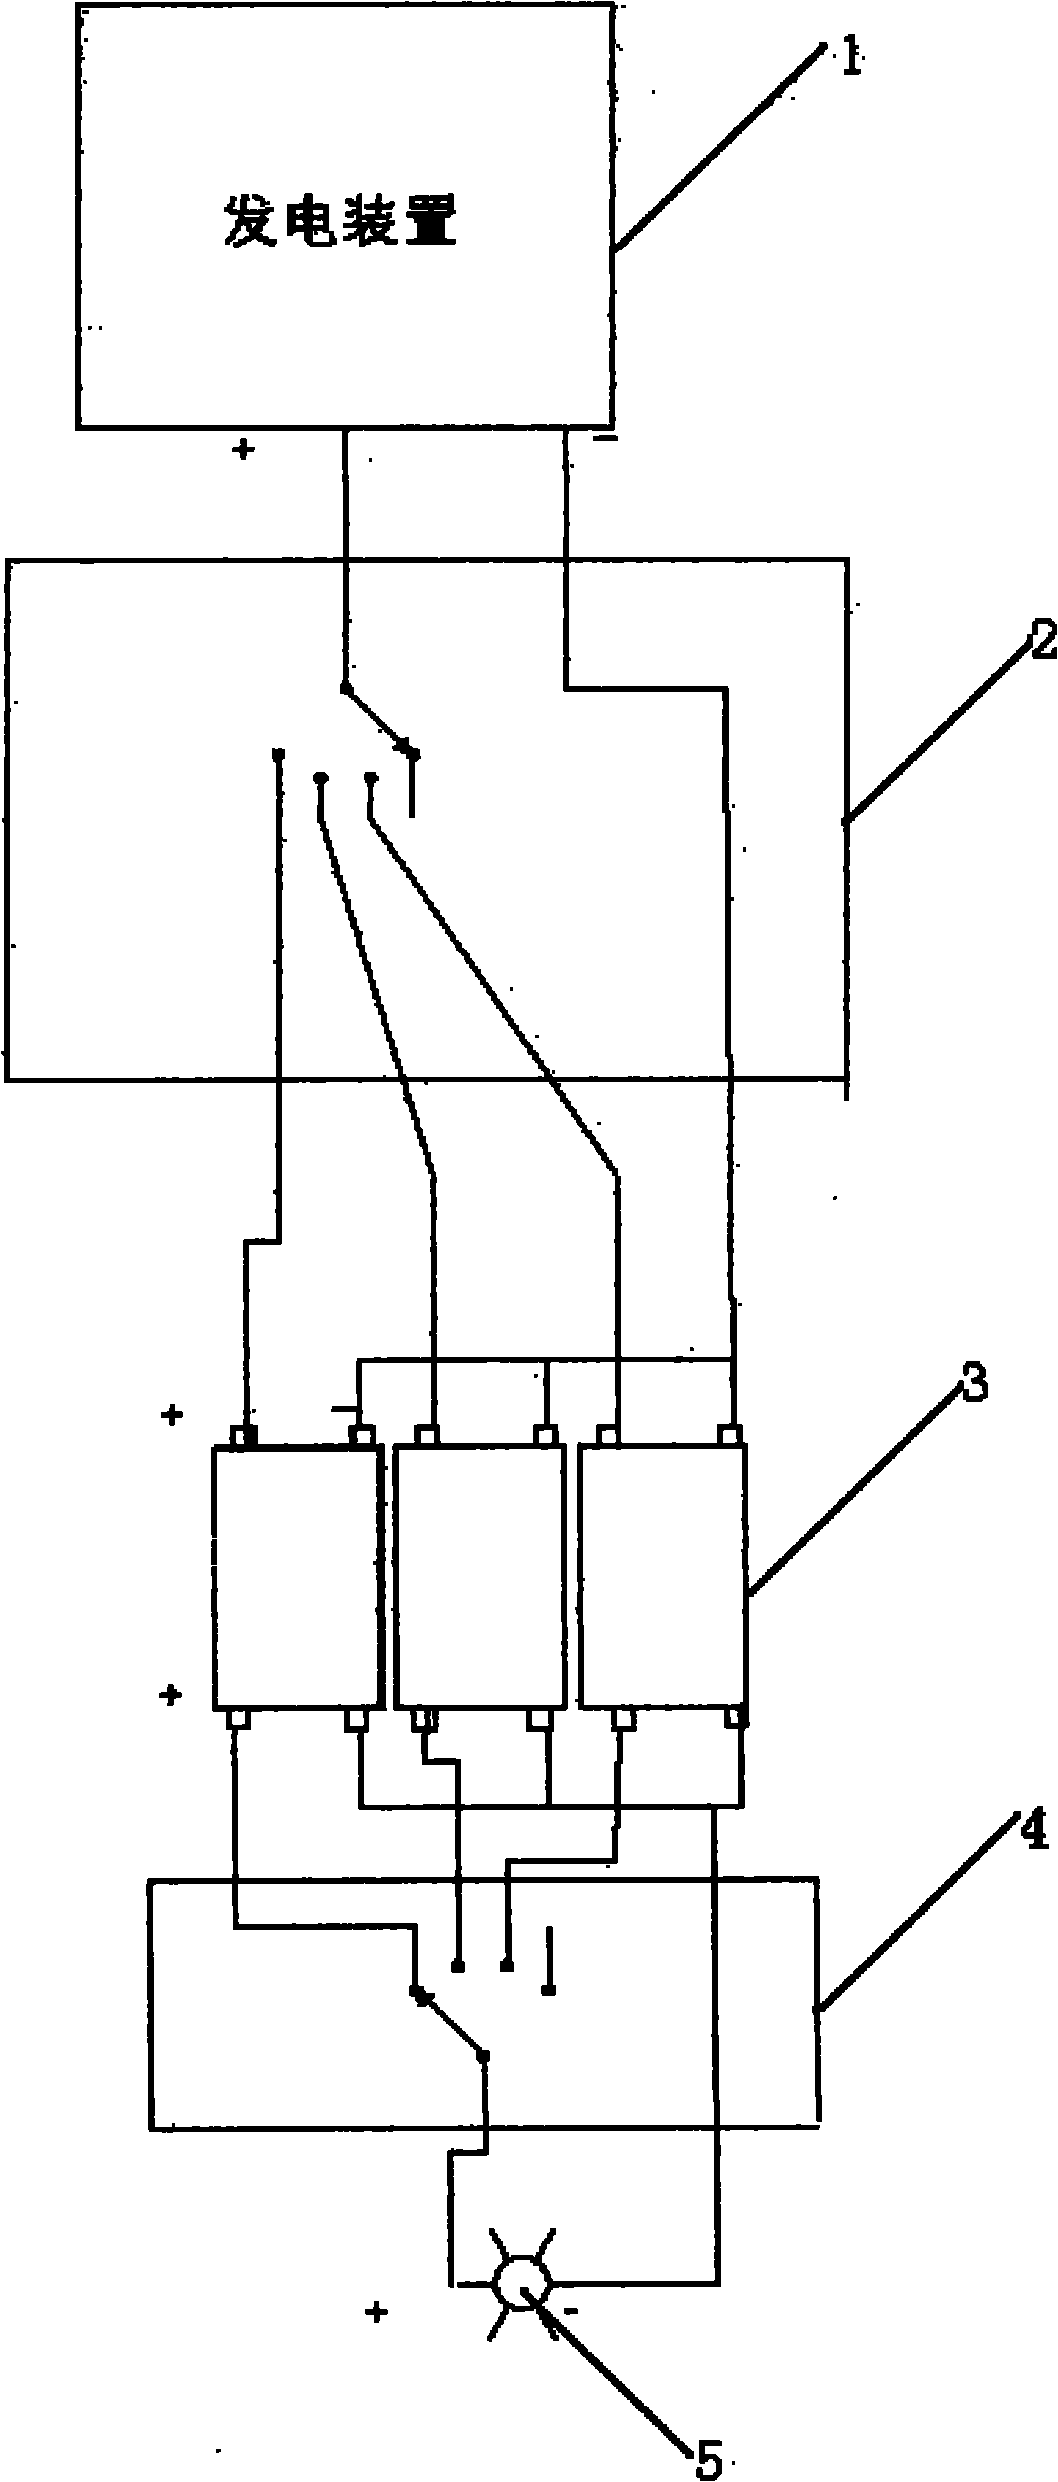 Method and system for circularly charging and discharging energy storage component